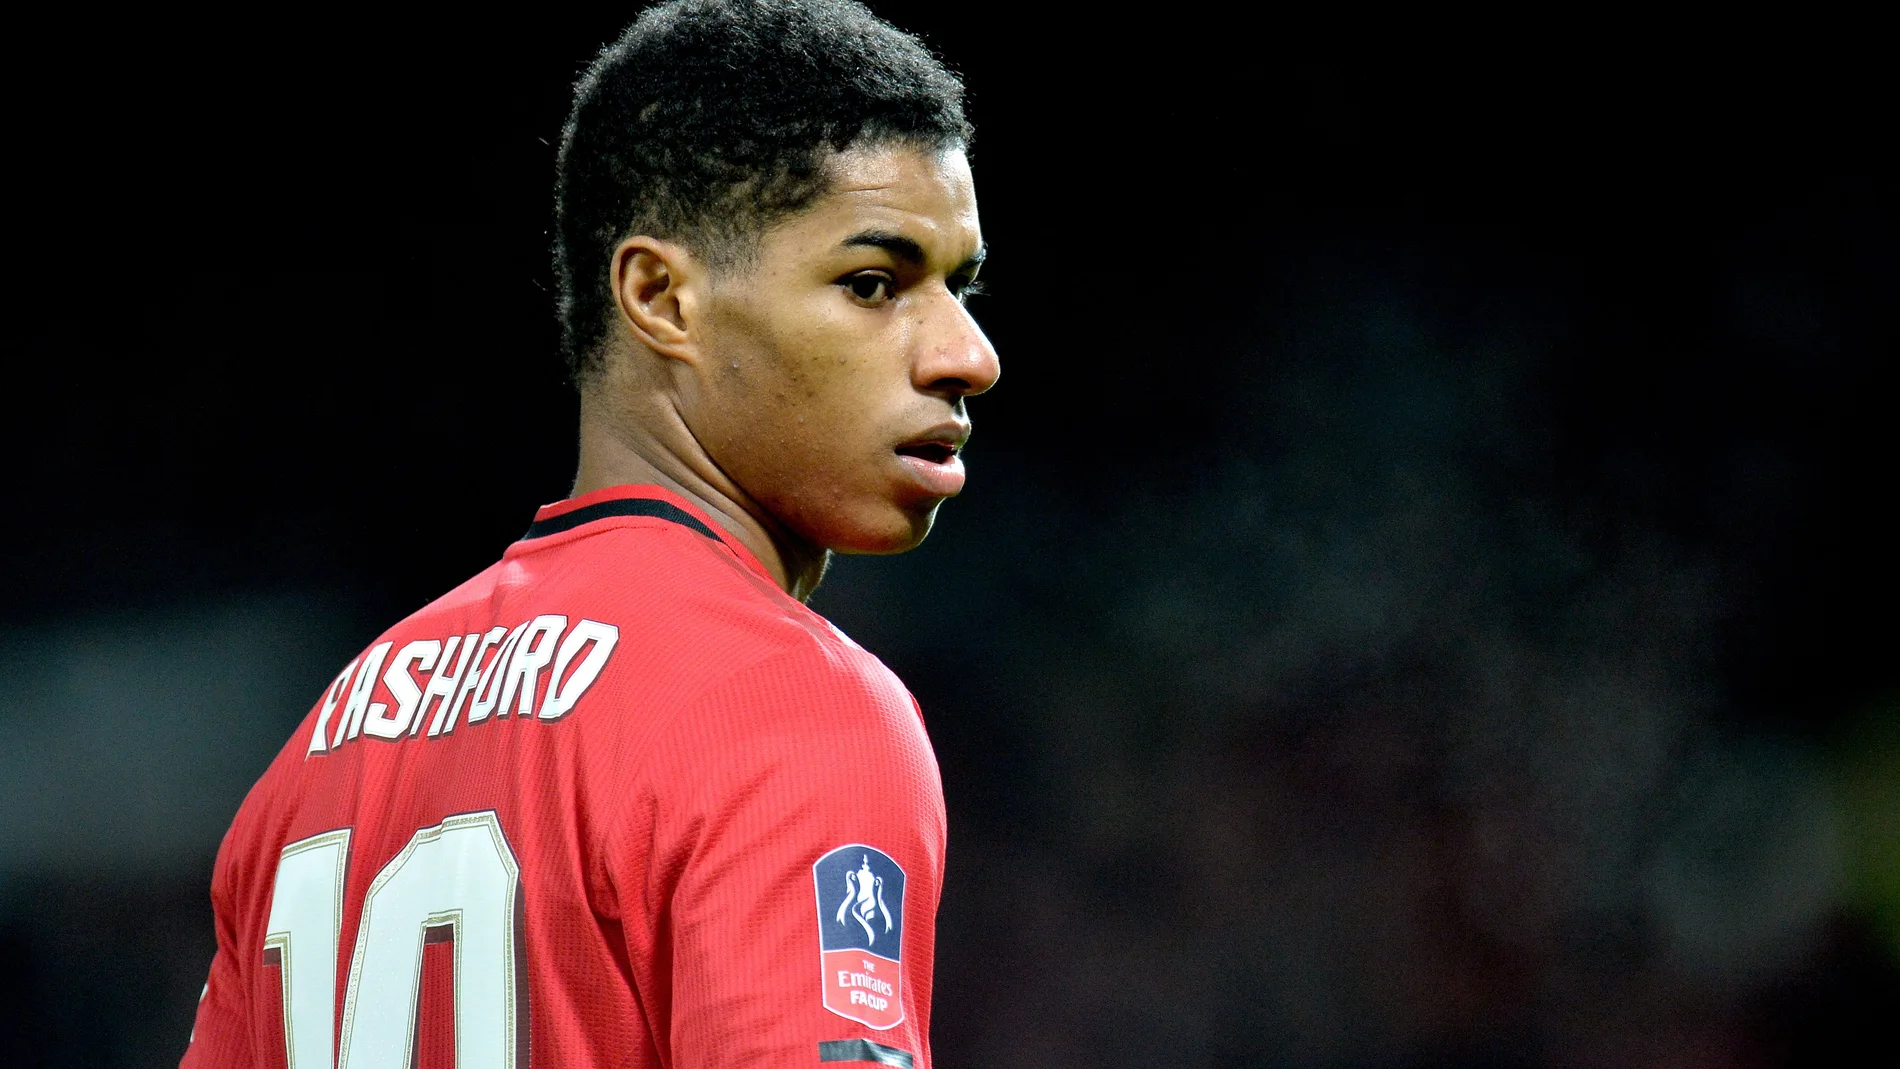 Marcus Rashford successful campaign for free school meals to children in need